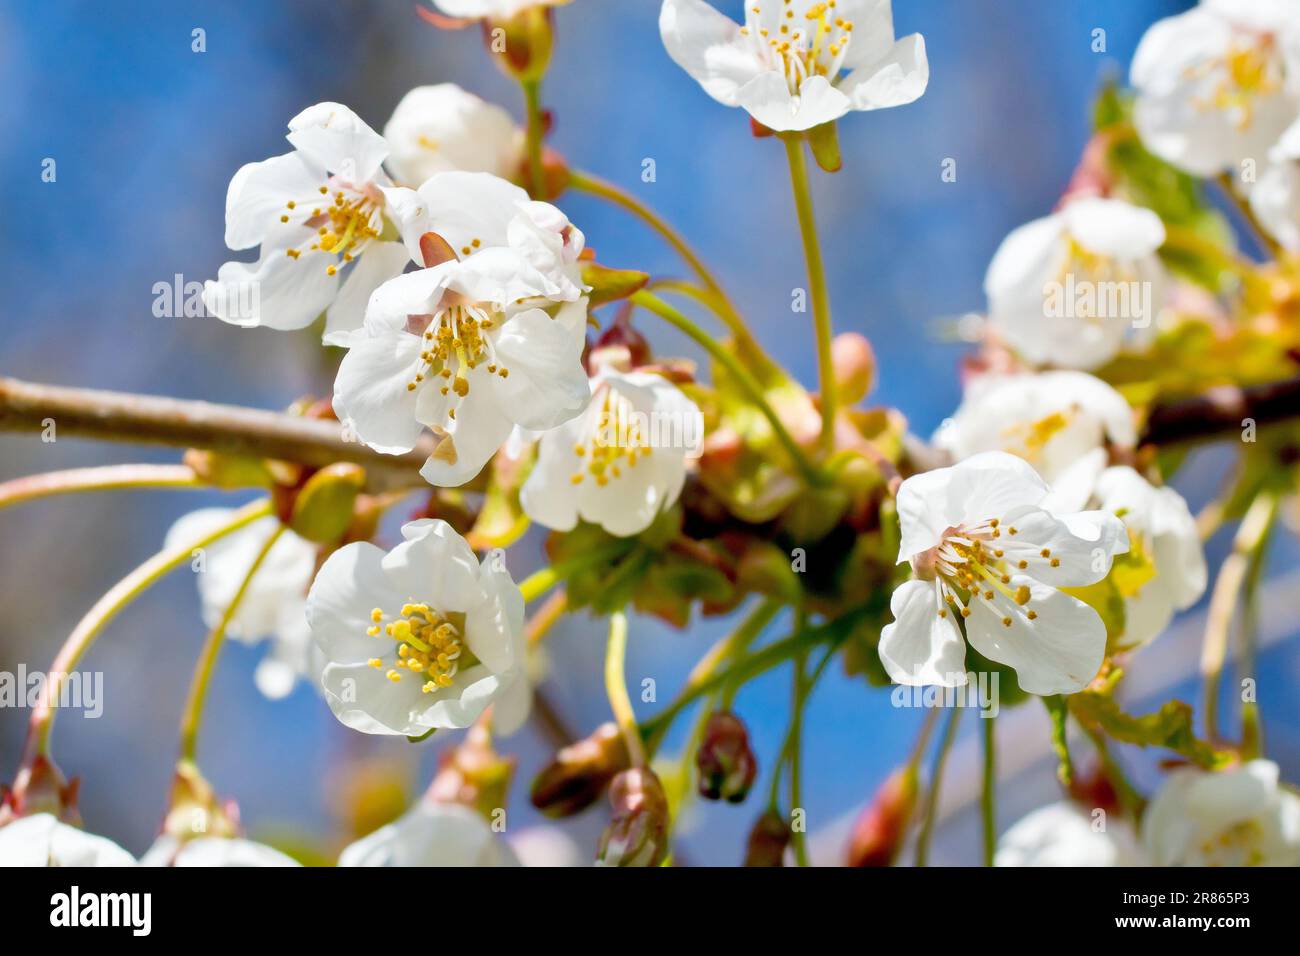 Wild Cherry blossom (prunus avium), close up showing a few of the white flowers in a cluster or spray on the branch of a tree against a blue sky. Stock Photo